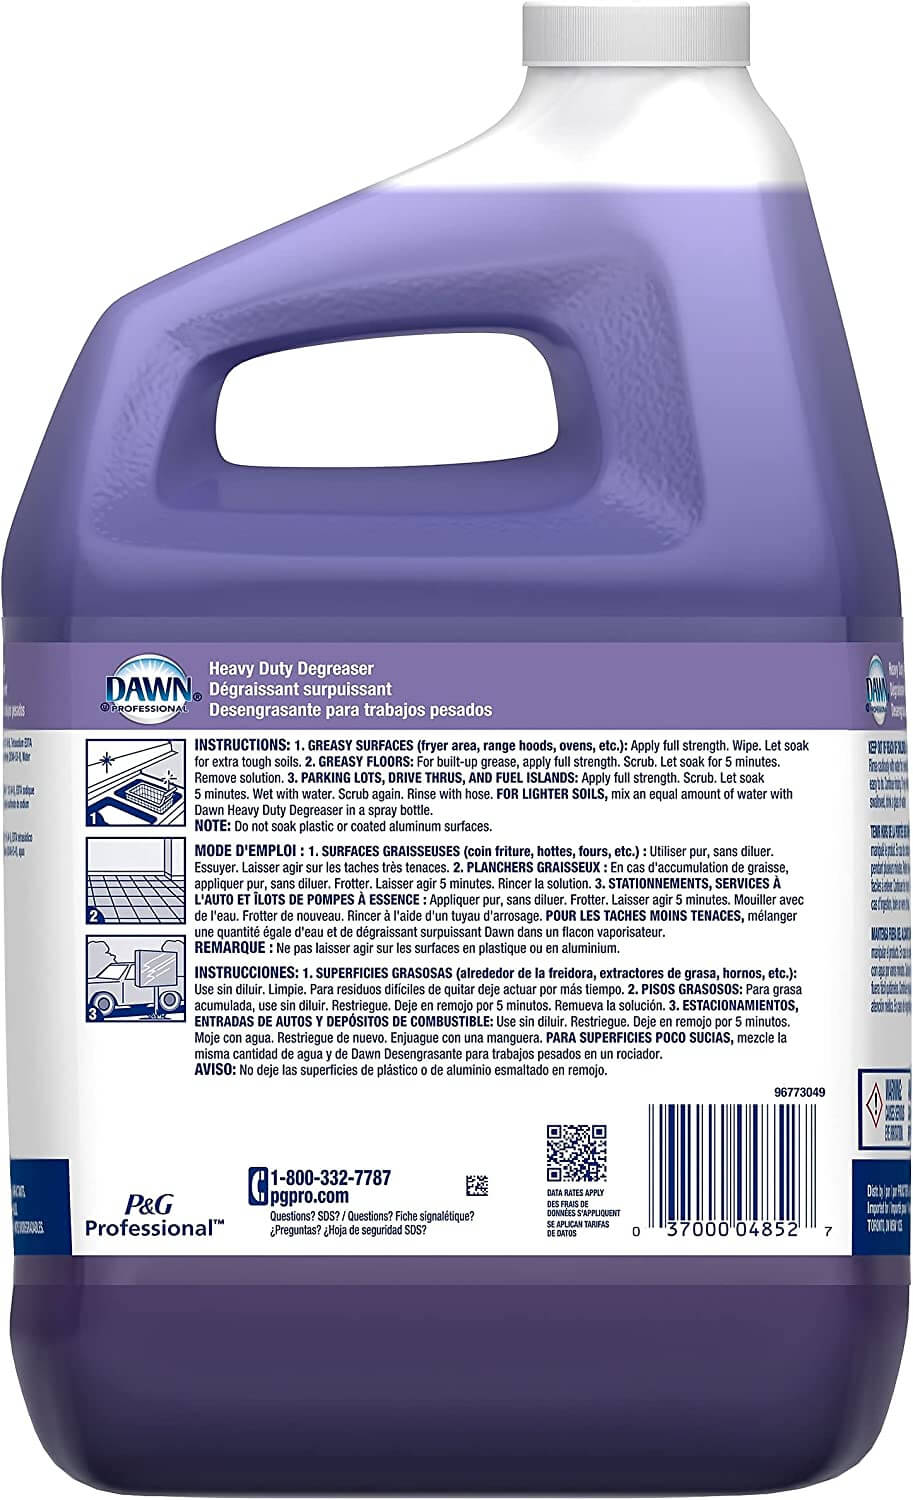 Dawn Professional Heavy Duty Degreaser-1 Gallon - Best before food